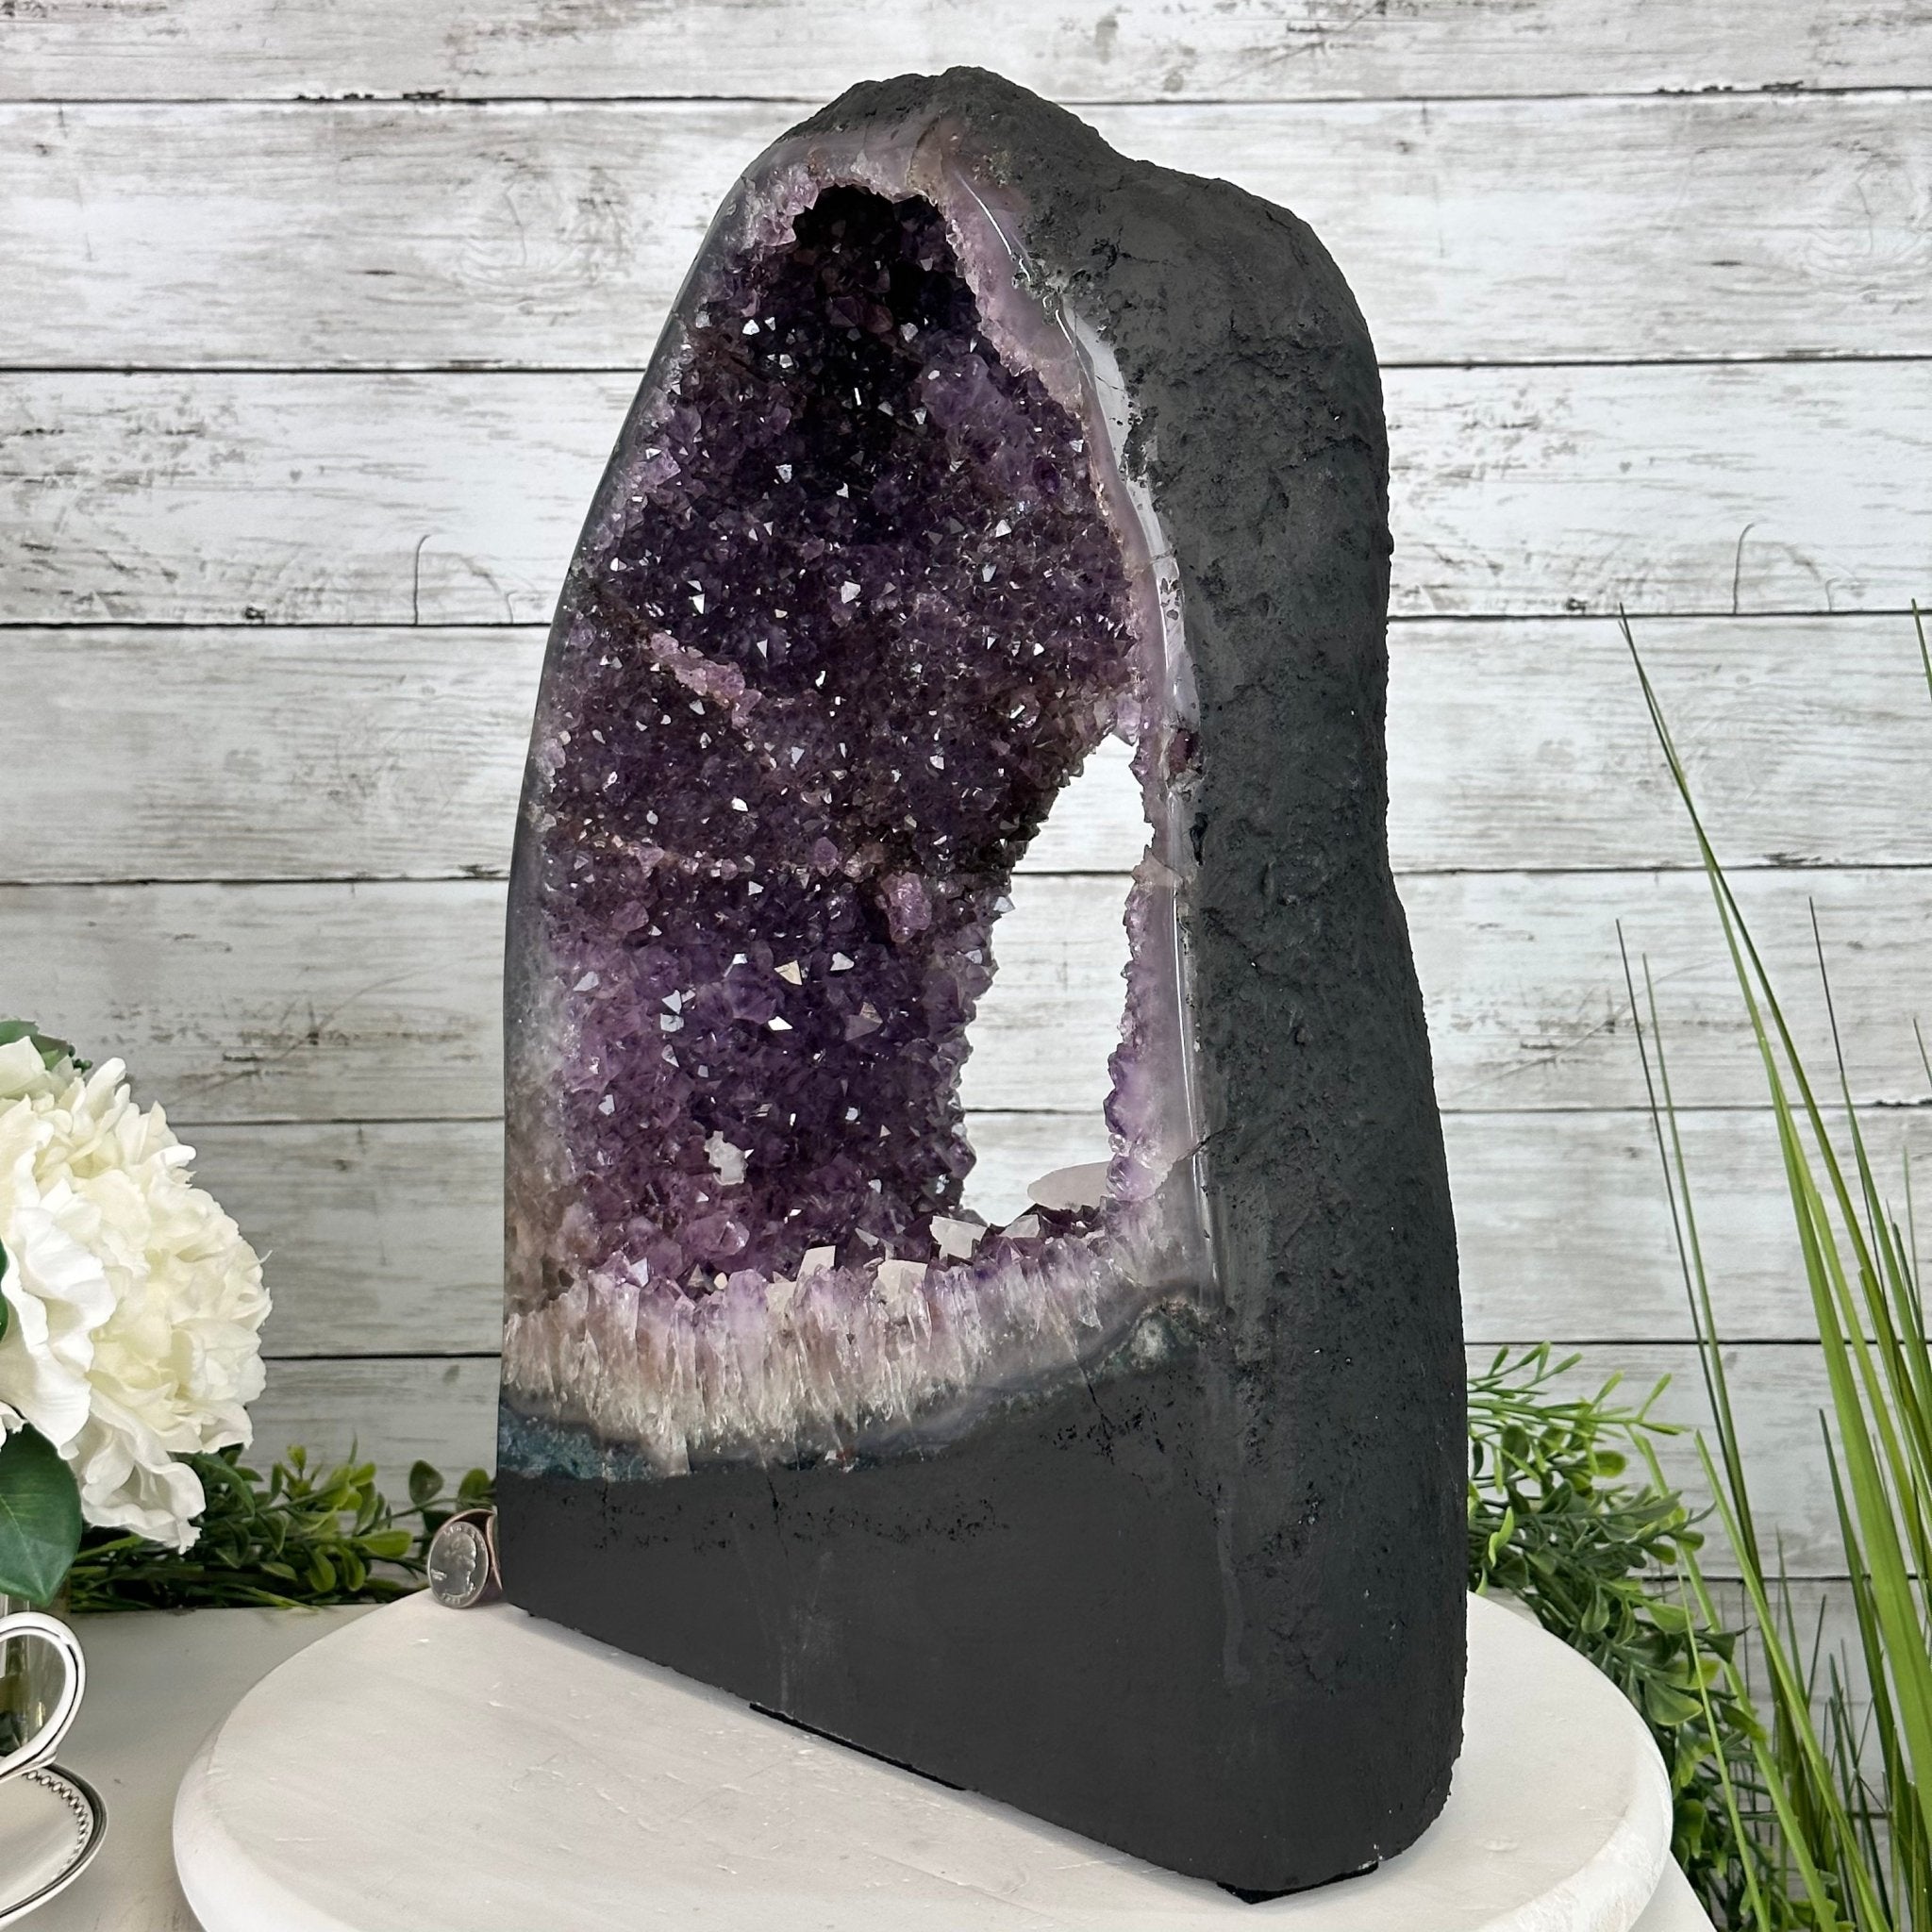 Extra Quality Open 2-Sided Brazilian Amethyst Cathedral, 34.8 lbs, 16.5" tall, Model #5605-0140 by Brazil Gems - Brazil GemsBrazil GemsExtra Quality Open 2-Sided Brazilian Amethyst Cathedral, 34.8 lbs, 16.5" tall, Model #5605-0140 by Brazil GemsOpen 2-Sided Cathedrals5605-0140